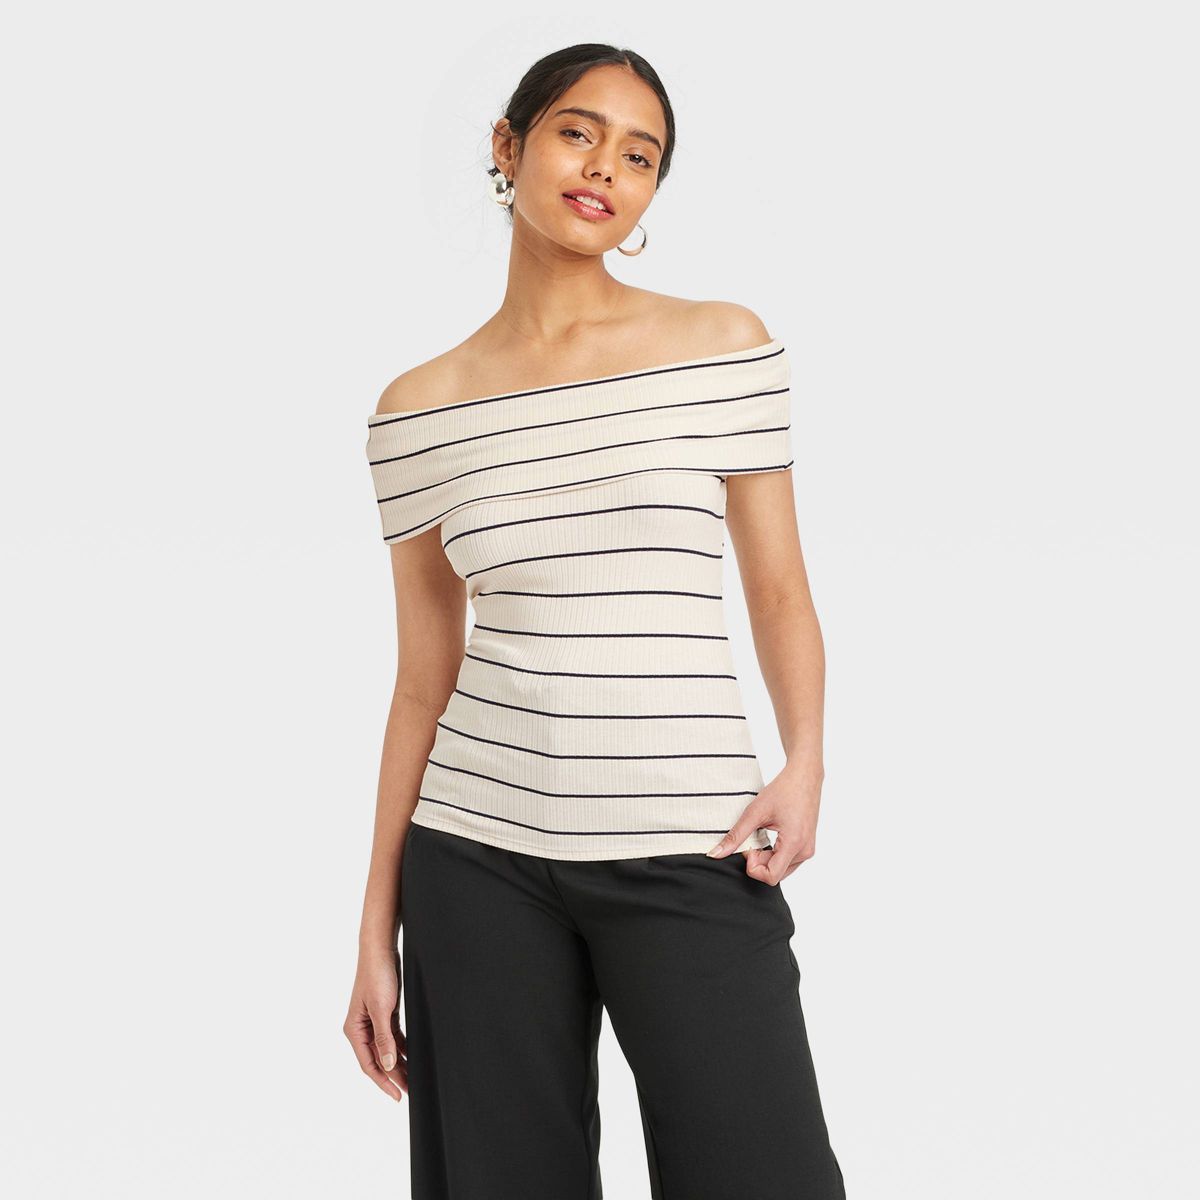 Women's Slim Fit Short Sleeve Off the Shoulder Top - A New Day™ White/Navy Striped M | Target